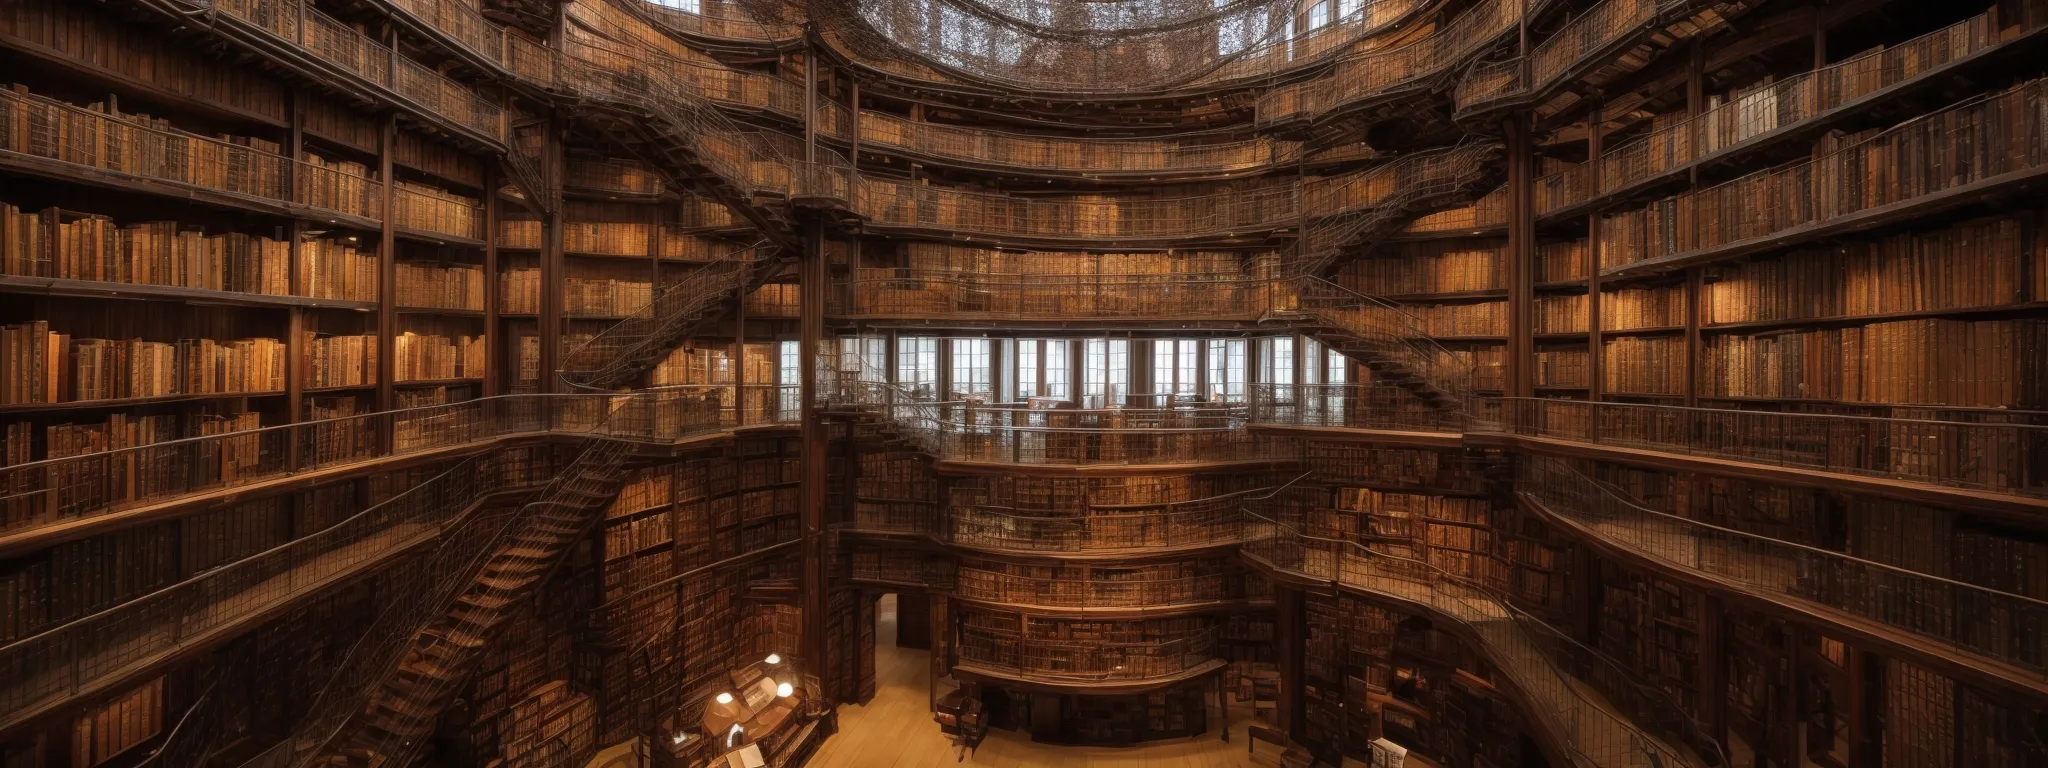 a panoramic view of a vast library with an intricate web of stairs connecting countless bookshelves, symbolizing an interconnected network of knowledge.